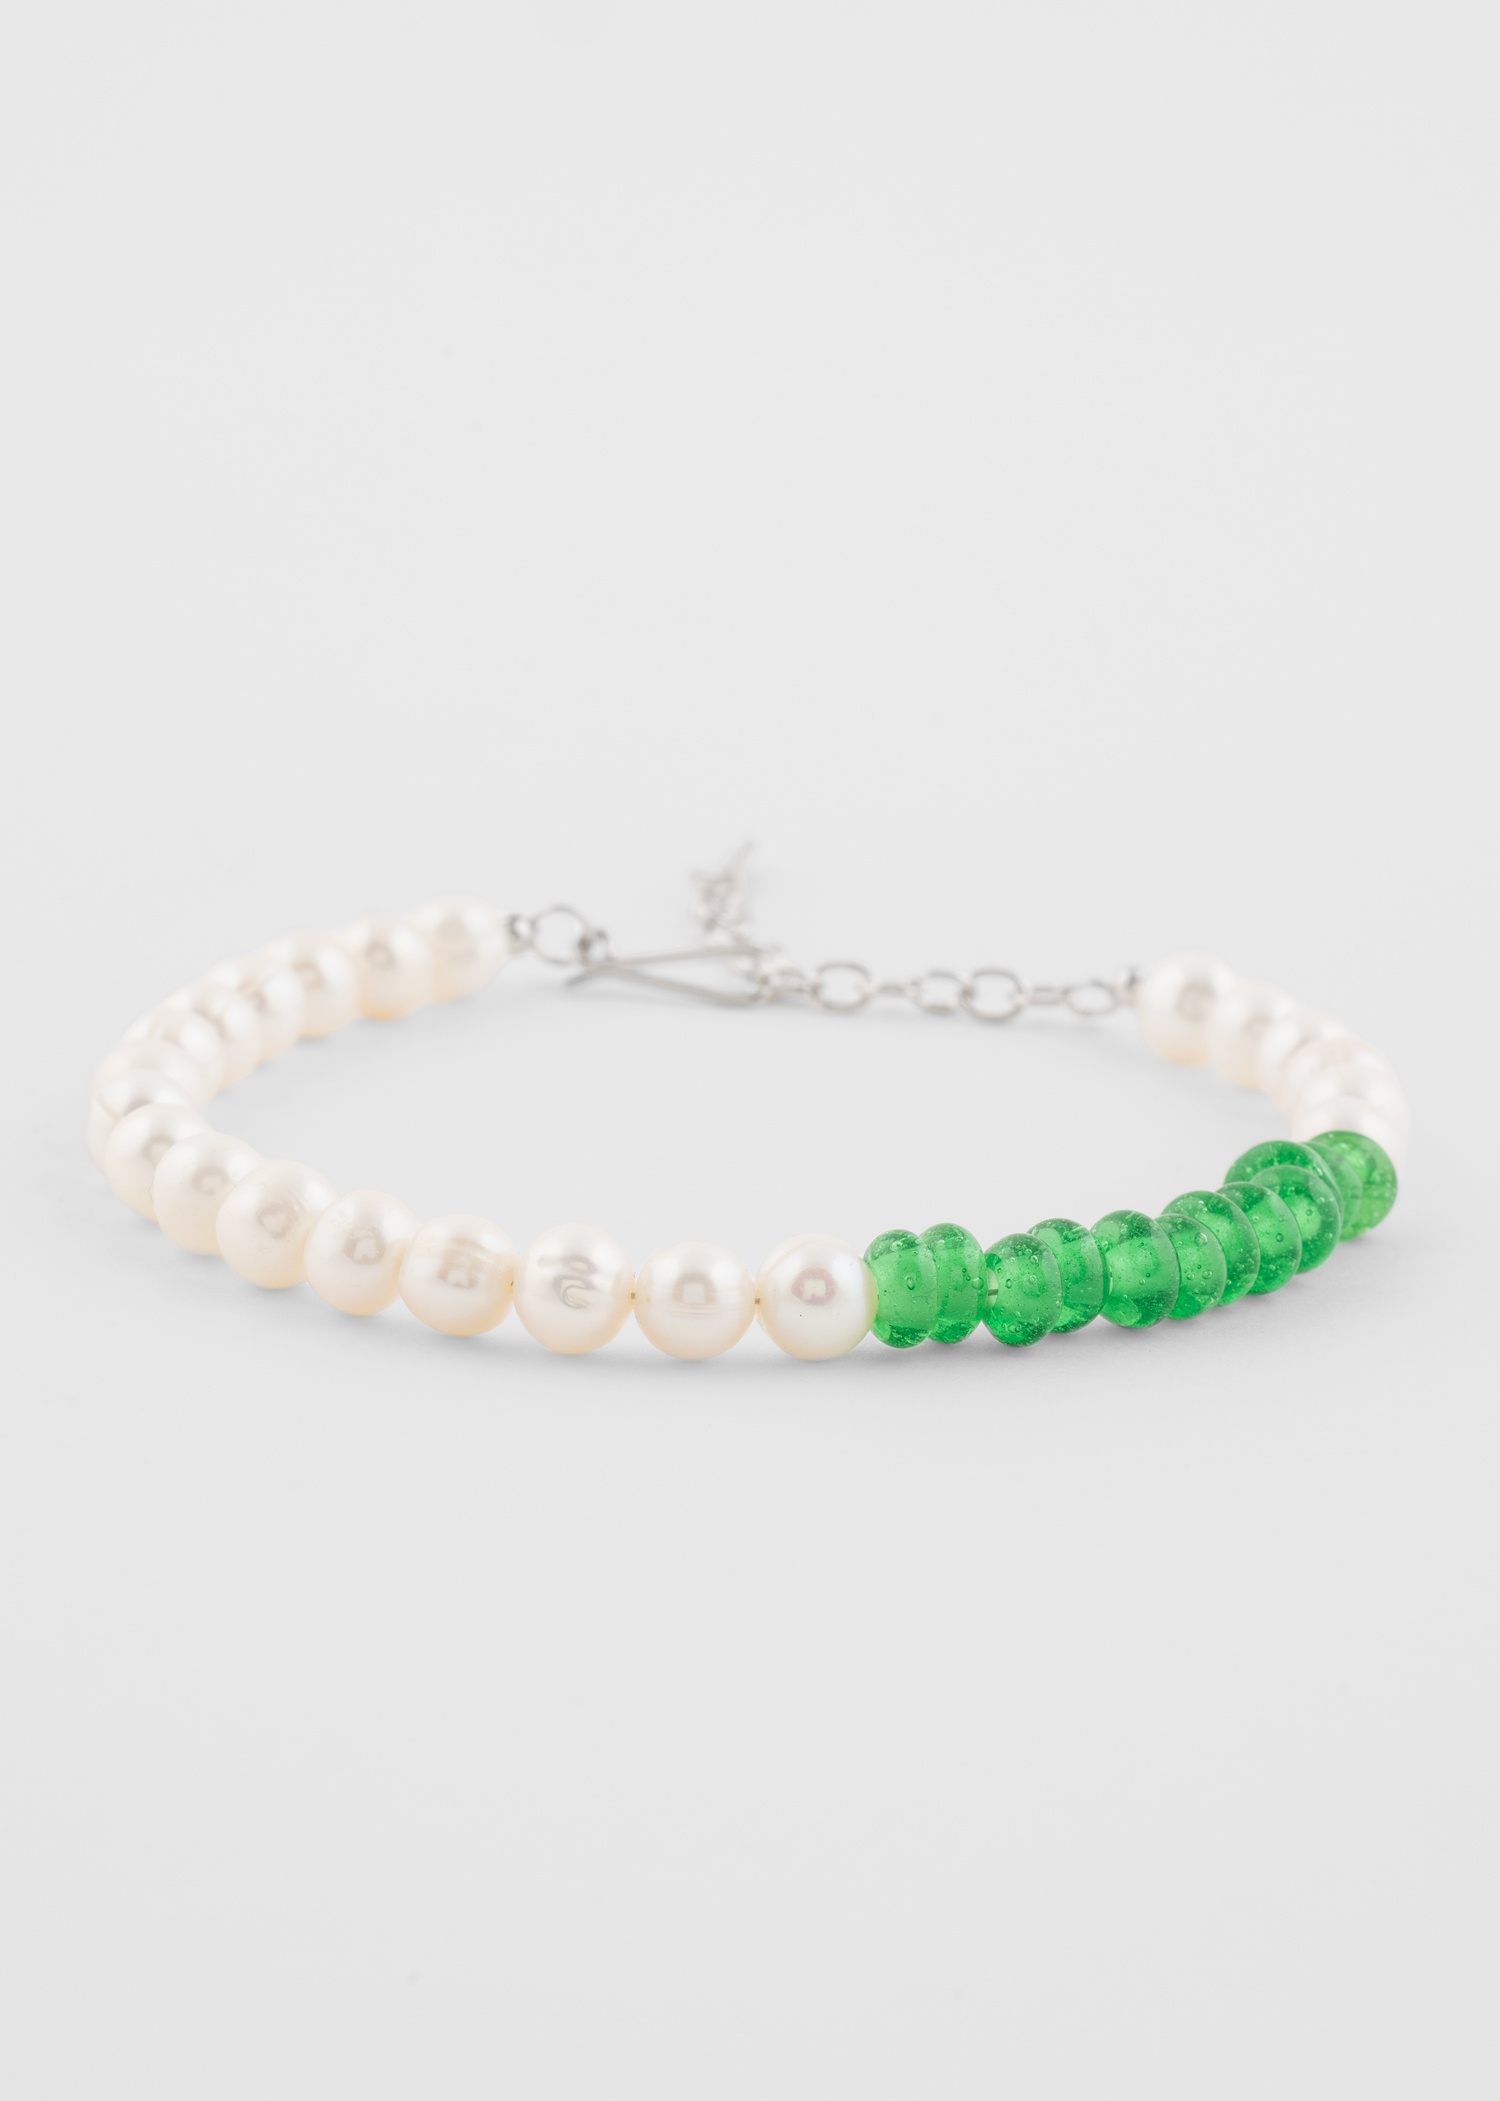 Pearl & Green Glass Bead Bracelet by Completedworks - 2